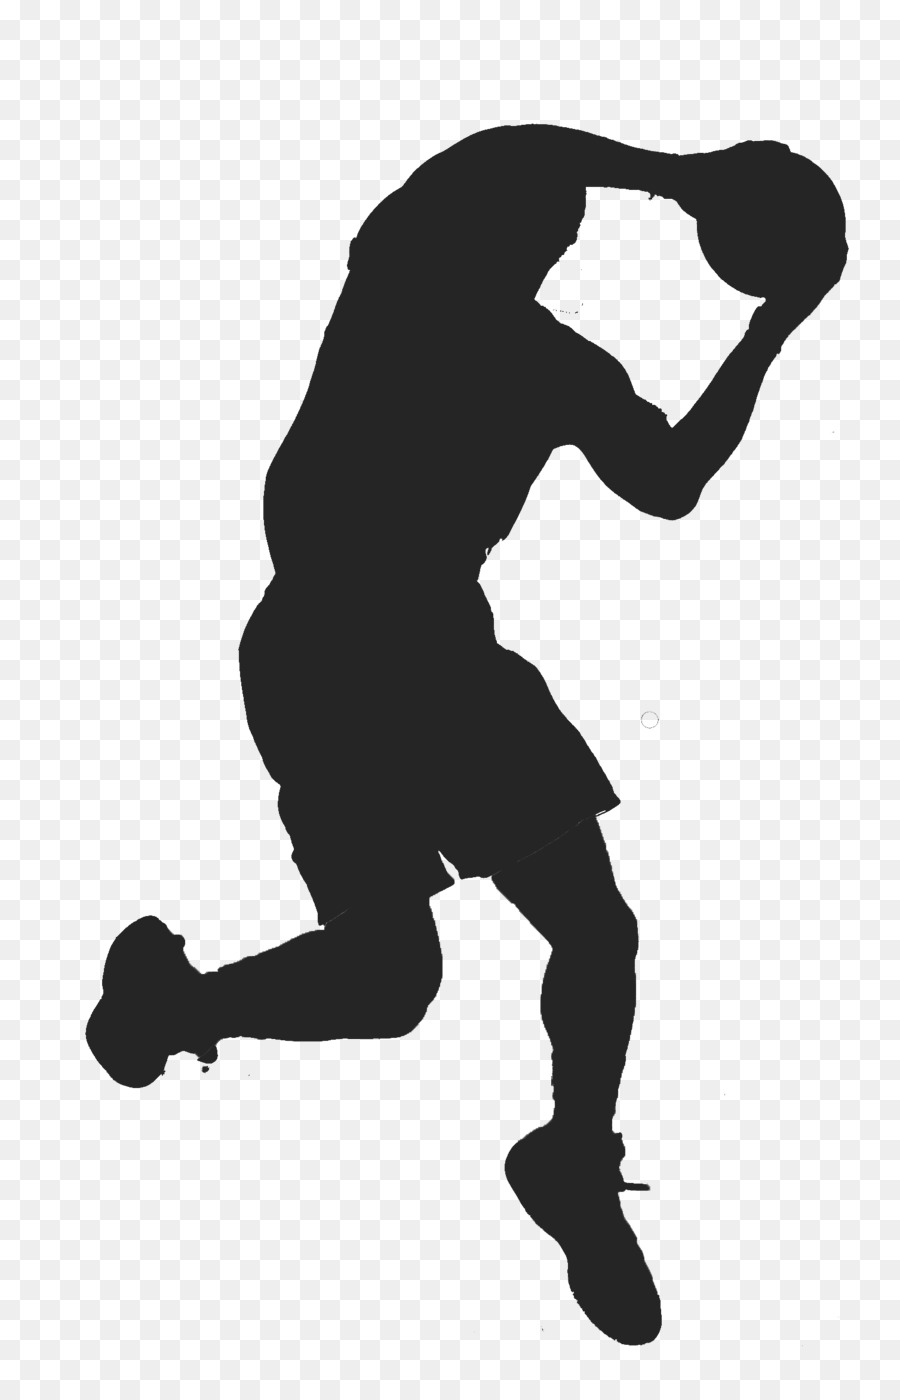 Basketball Jumpman Silhouette Athlete - NBA Players png download - 1507*2326 - Free Transparent Basketball png Download.